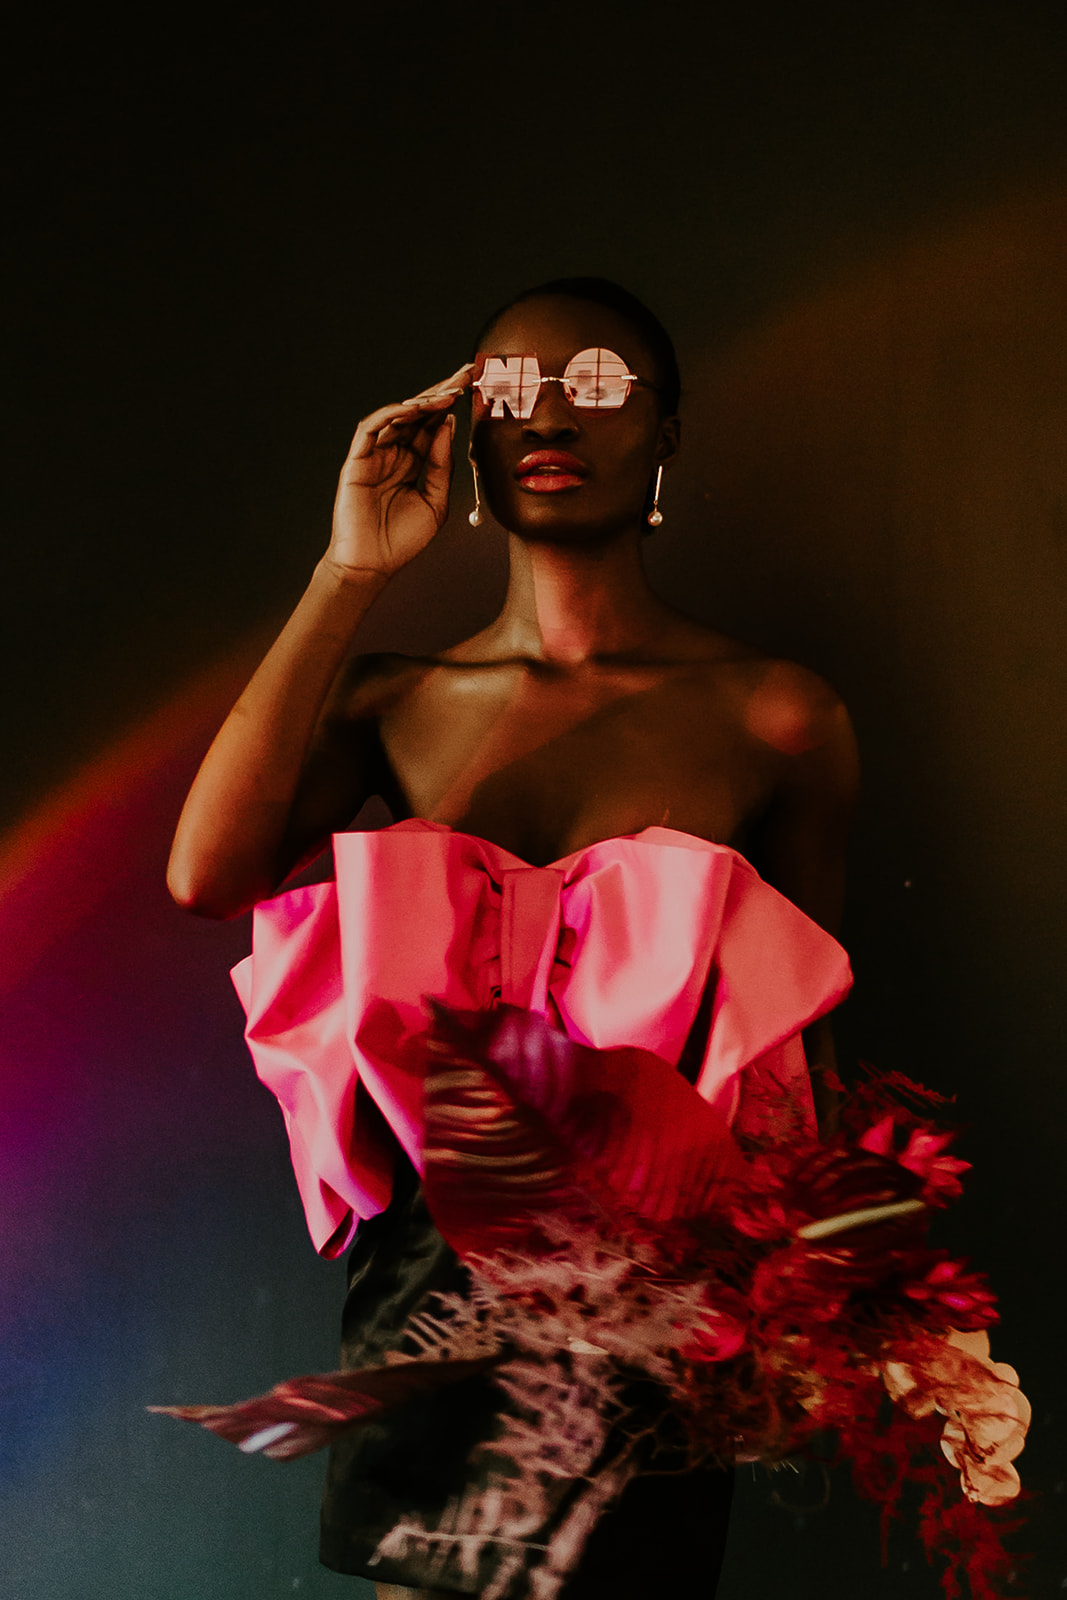 NO tinted sunglasses, pearl drop earrings, disco balls, and, rented pink gowns from Rock The Rental YYC combine to create this modern fuchsia fashion inspiration!